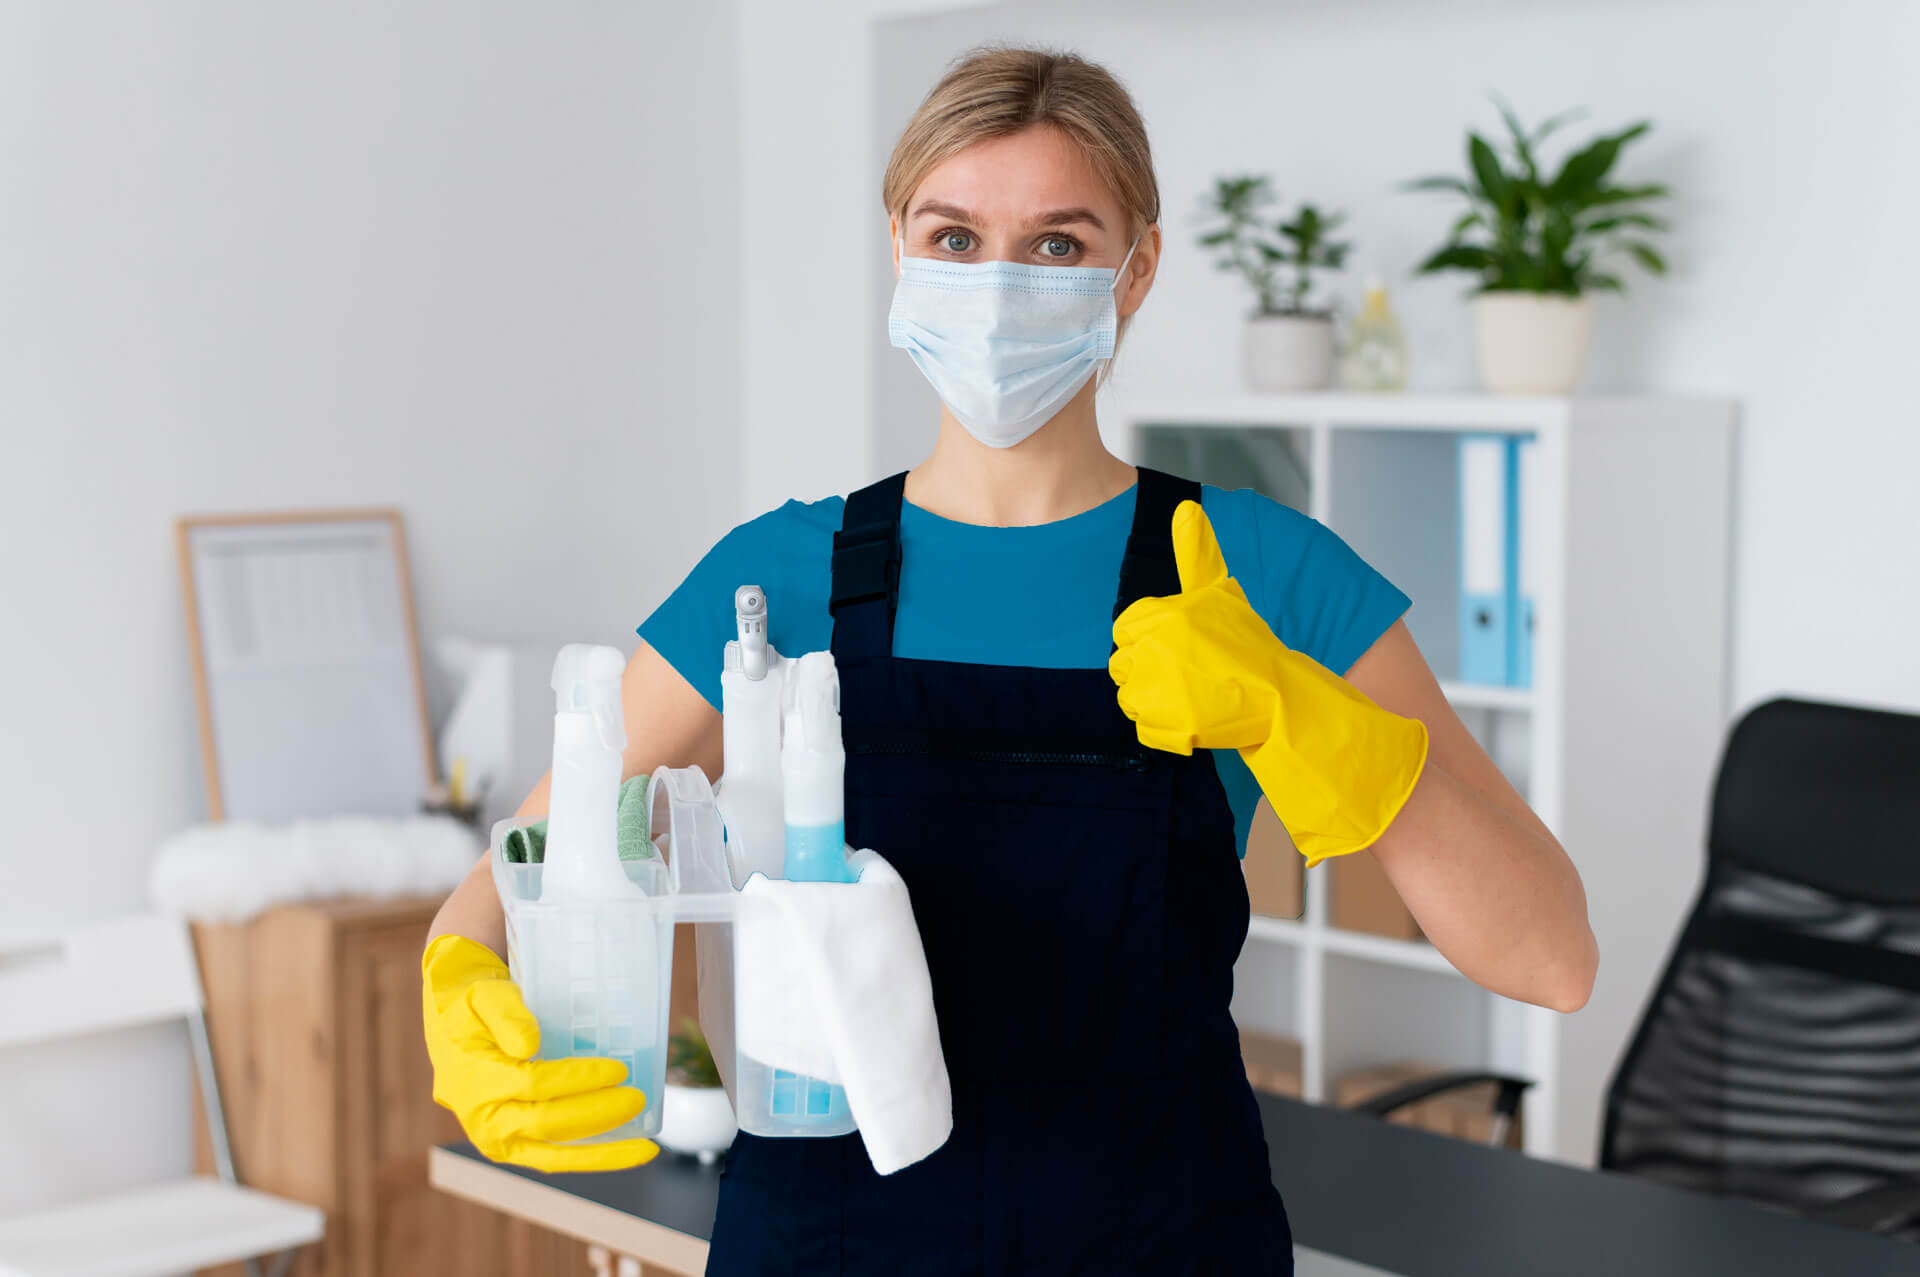 A maid from a cleaning service in Garland, Texas is giving a thumbs up while wearing a mask and gloves.